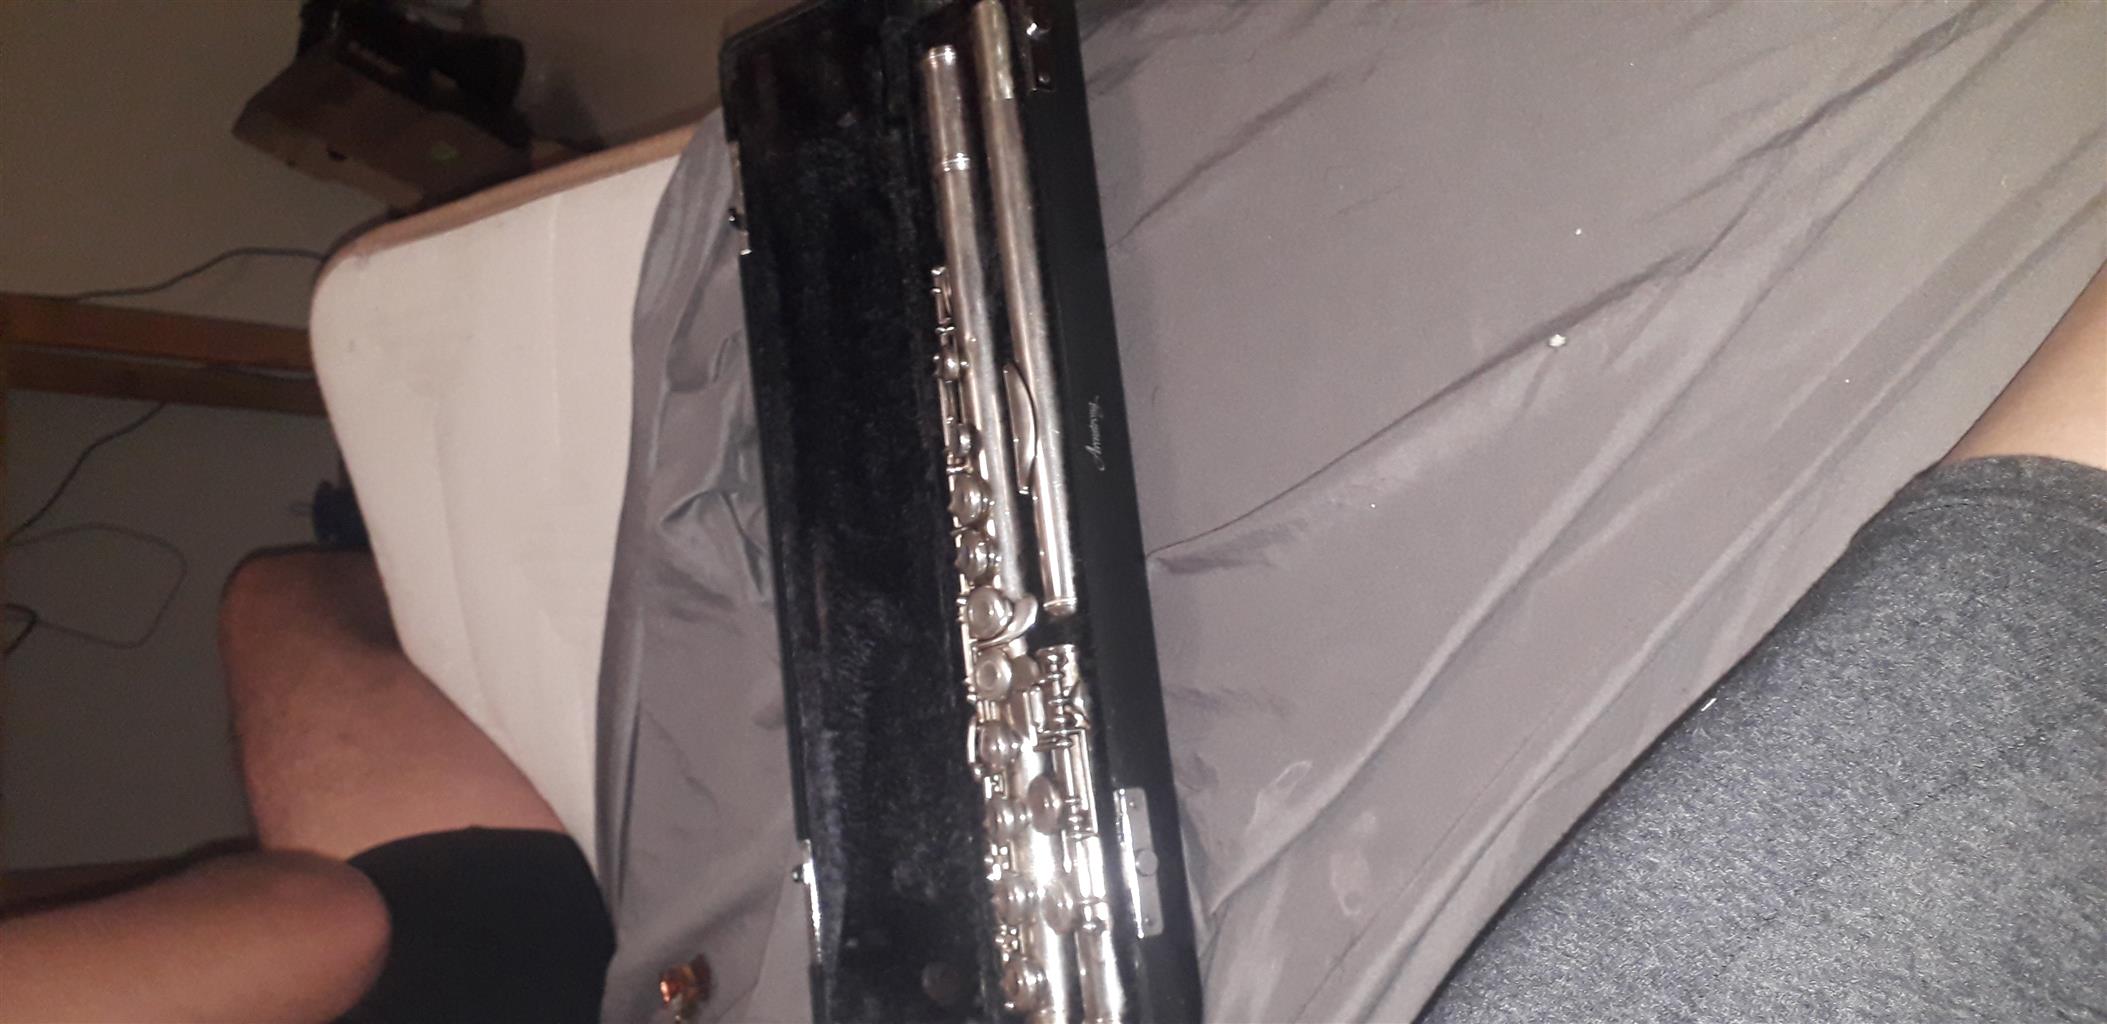 I have a amstrong 104 USA flute for sale